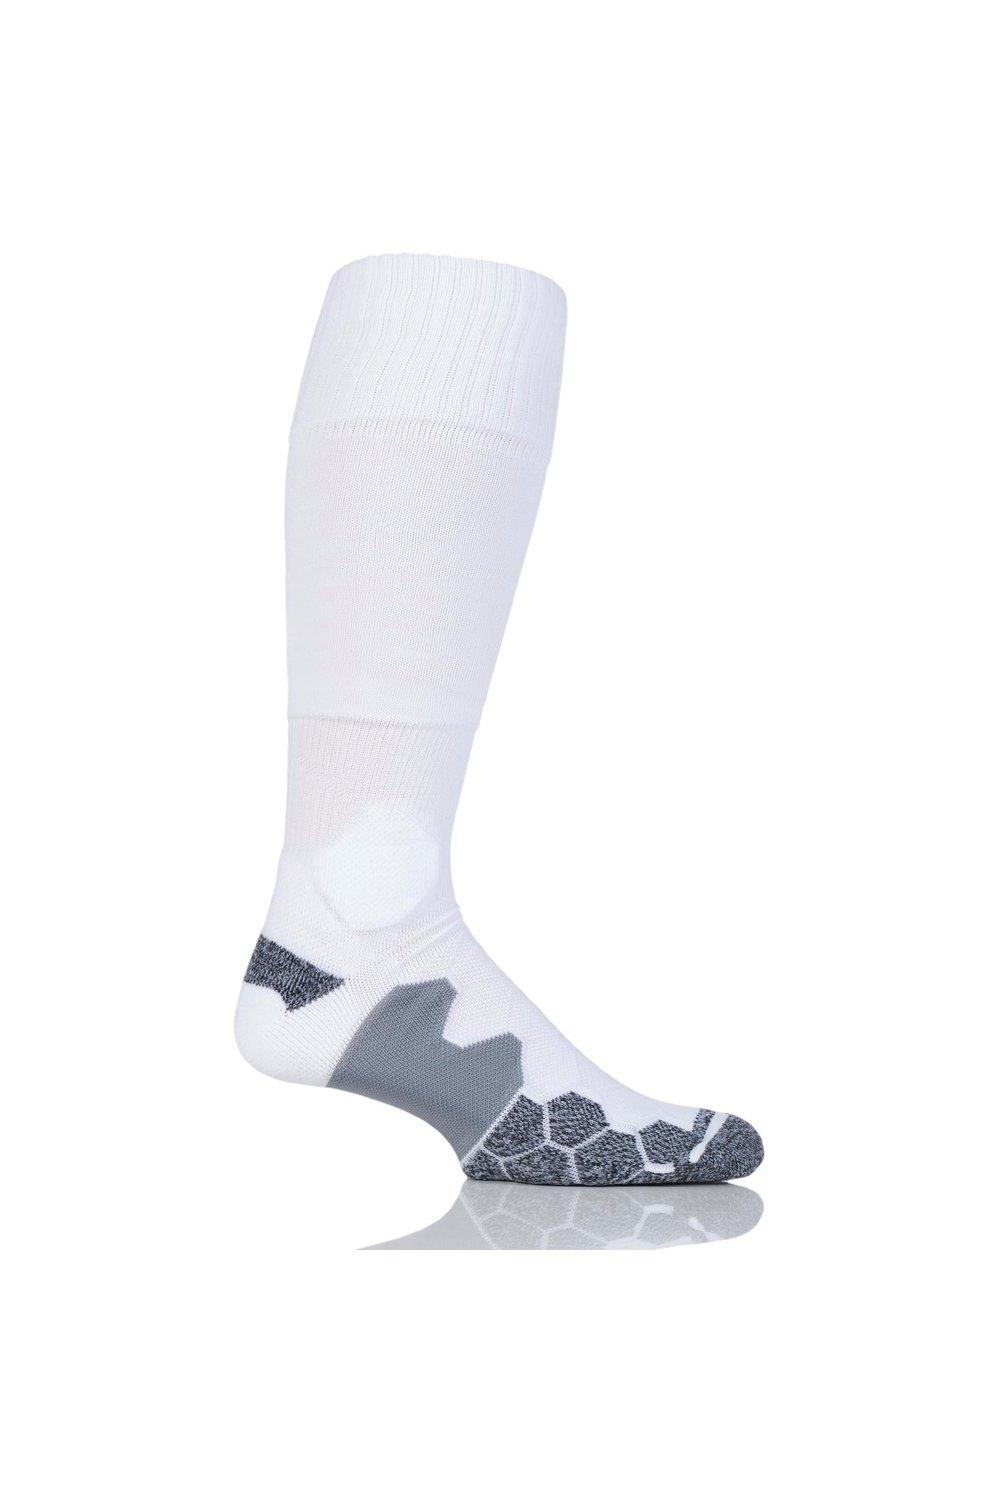 1 Pair Made in the UK Cushioned Foot Technical Football Socks